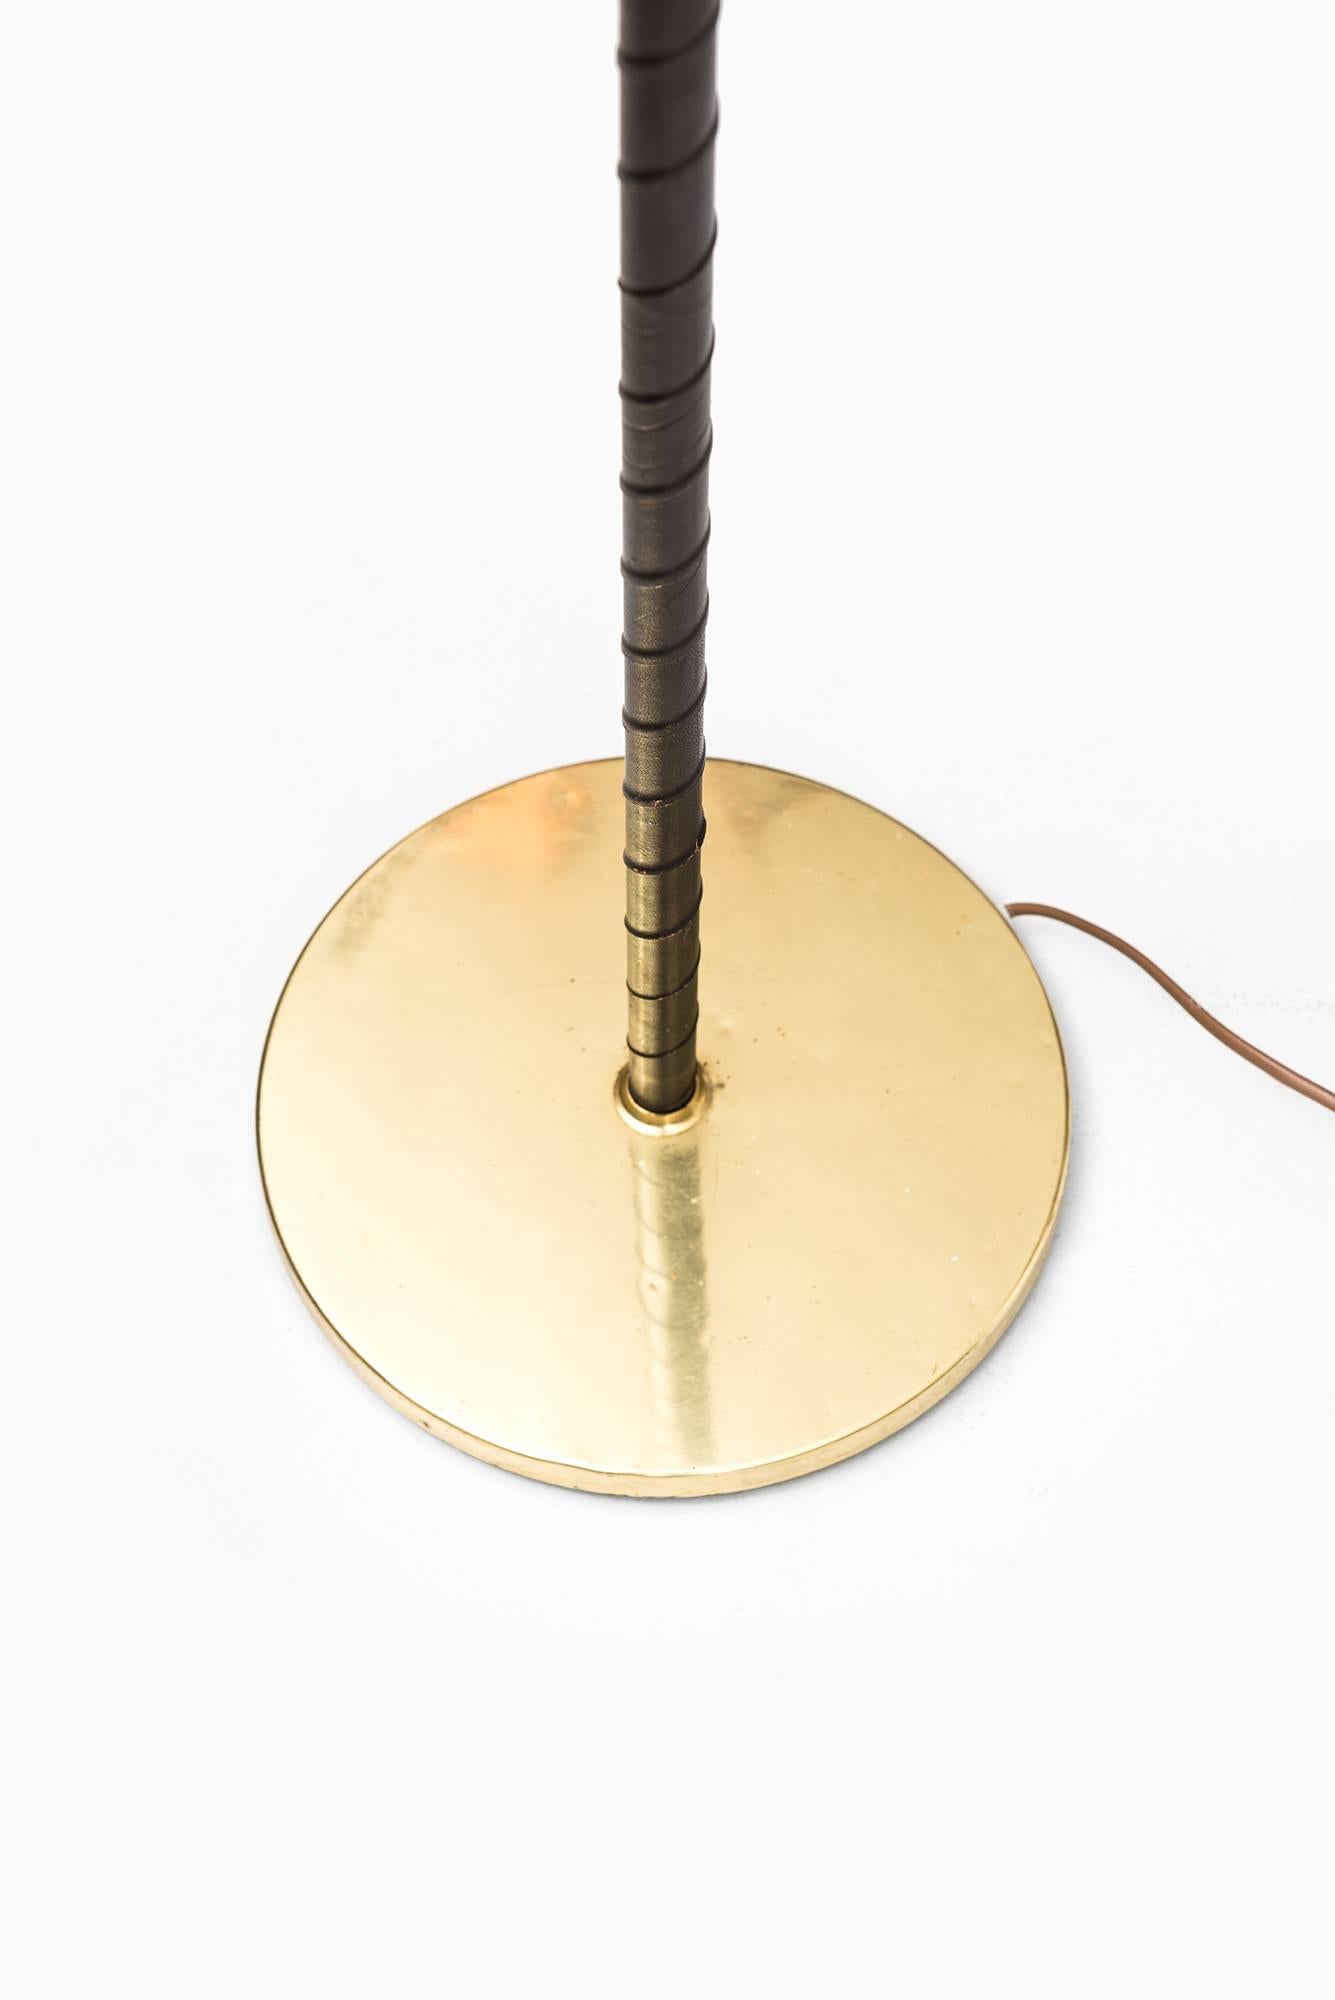 Scandinavian Modern Floor Lamp in Black Leather, Brass and Woven Cane Shade Produced in Sweden